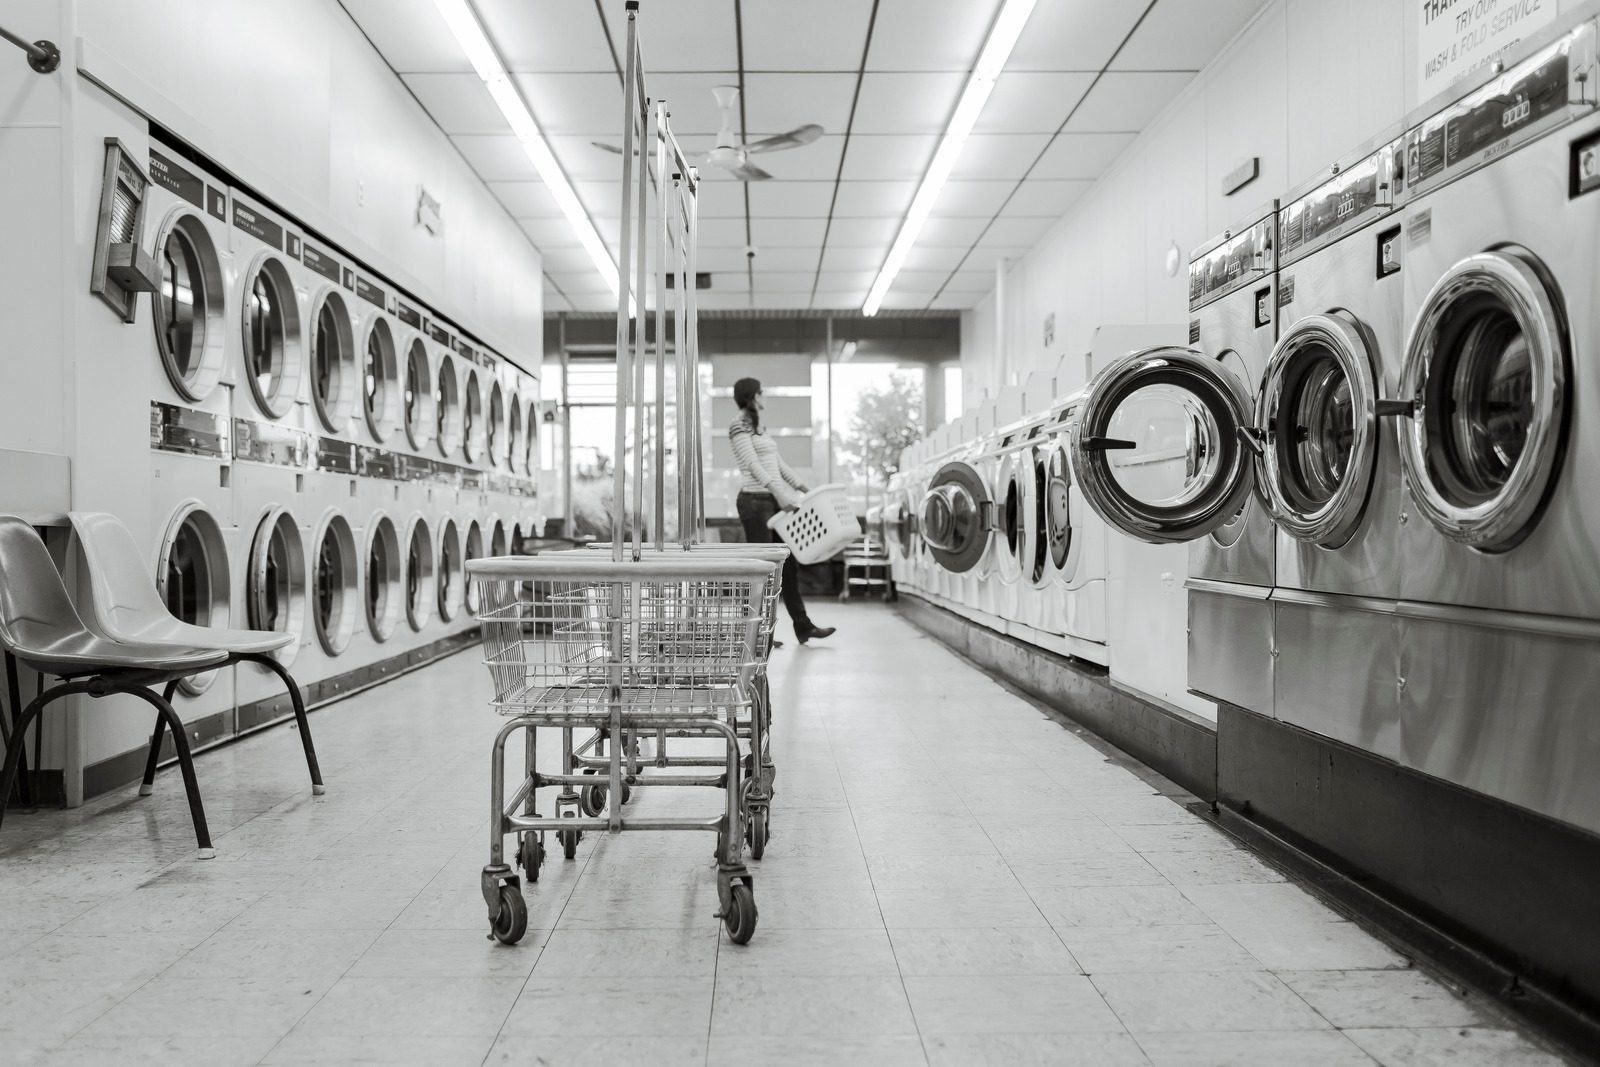 Grayscale photo showing metal laundromat carts at the center and machines on the side. A figure is in soft focus in the back carrying a basket.